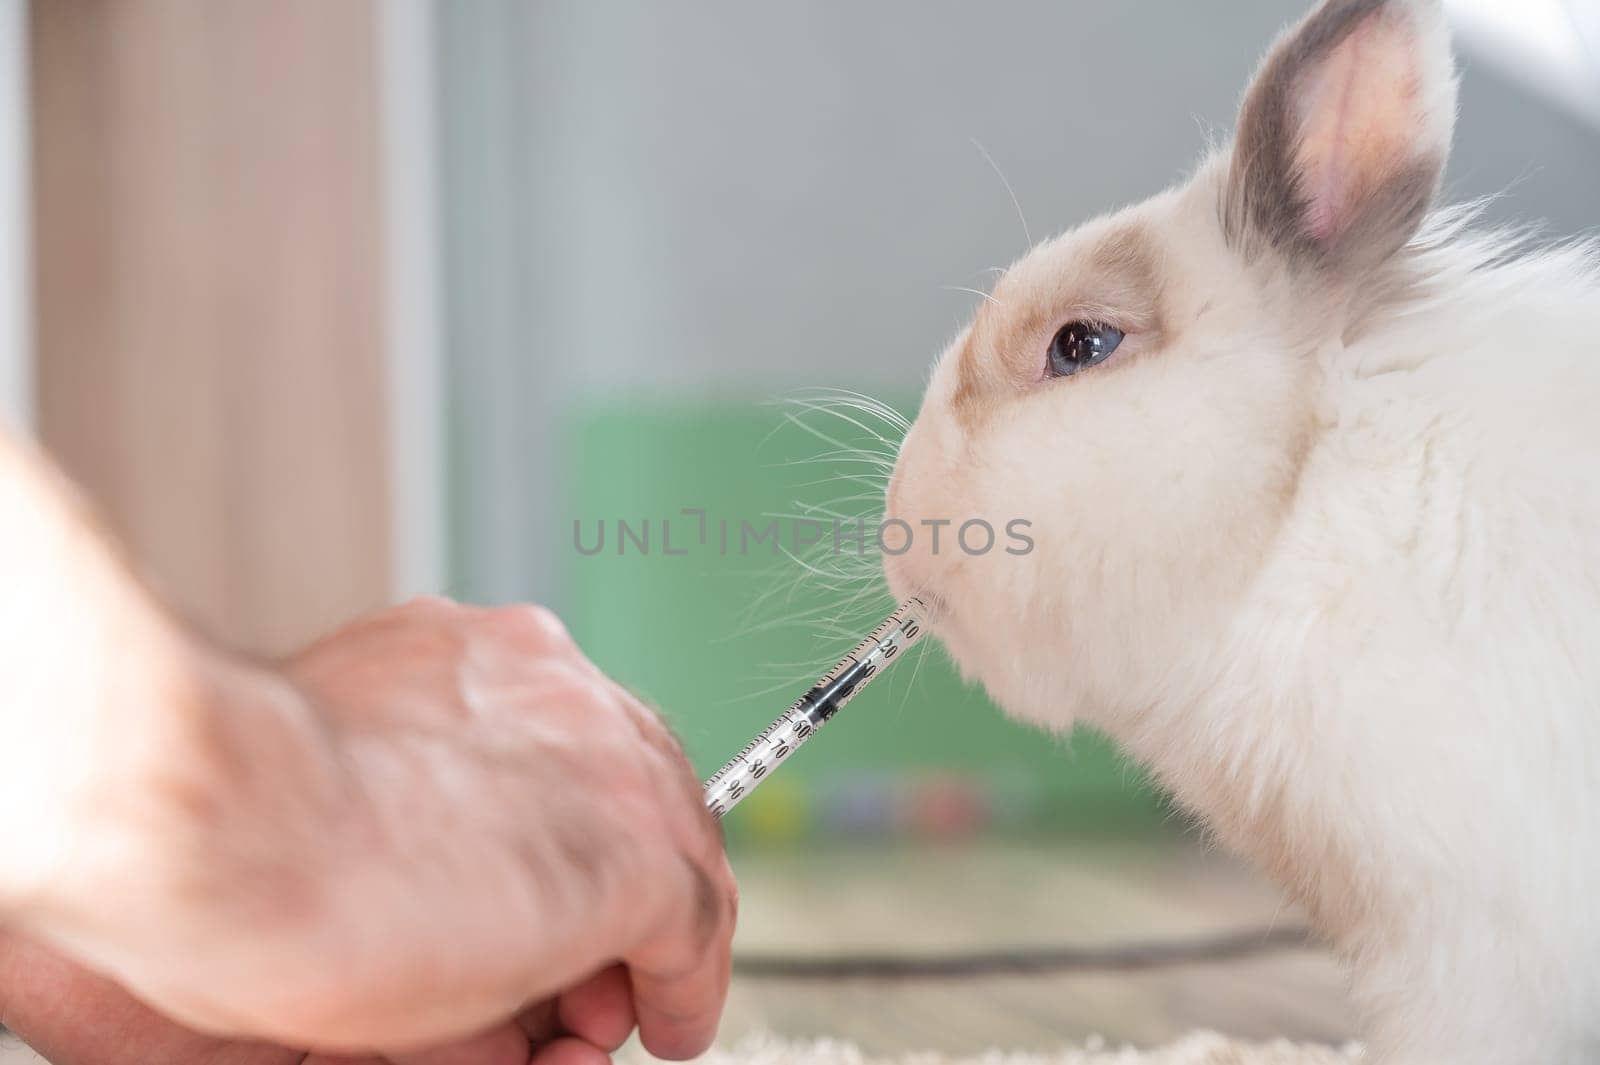 A man gives a rabbit medicine from a syringe. Bunny drinks from a syringe. by mrwed54